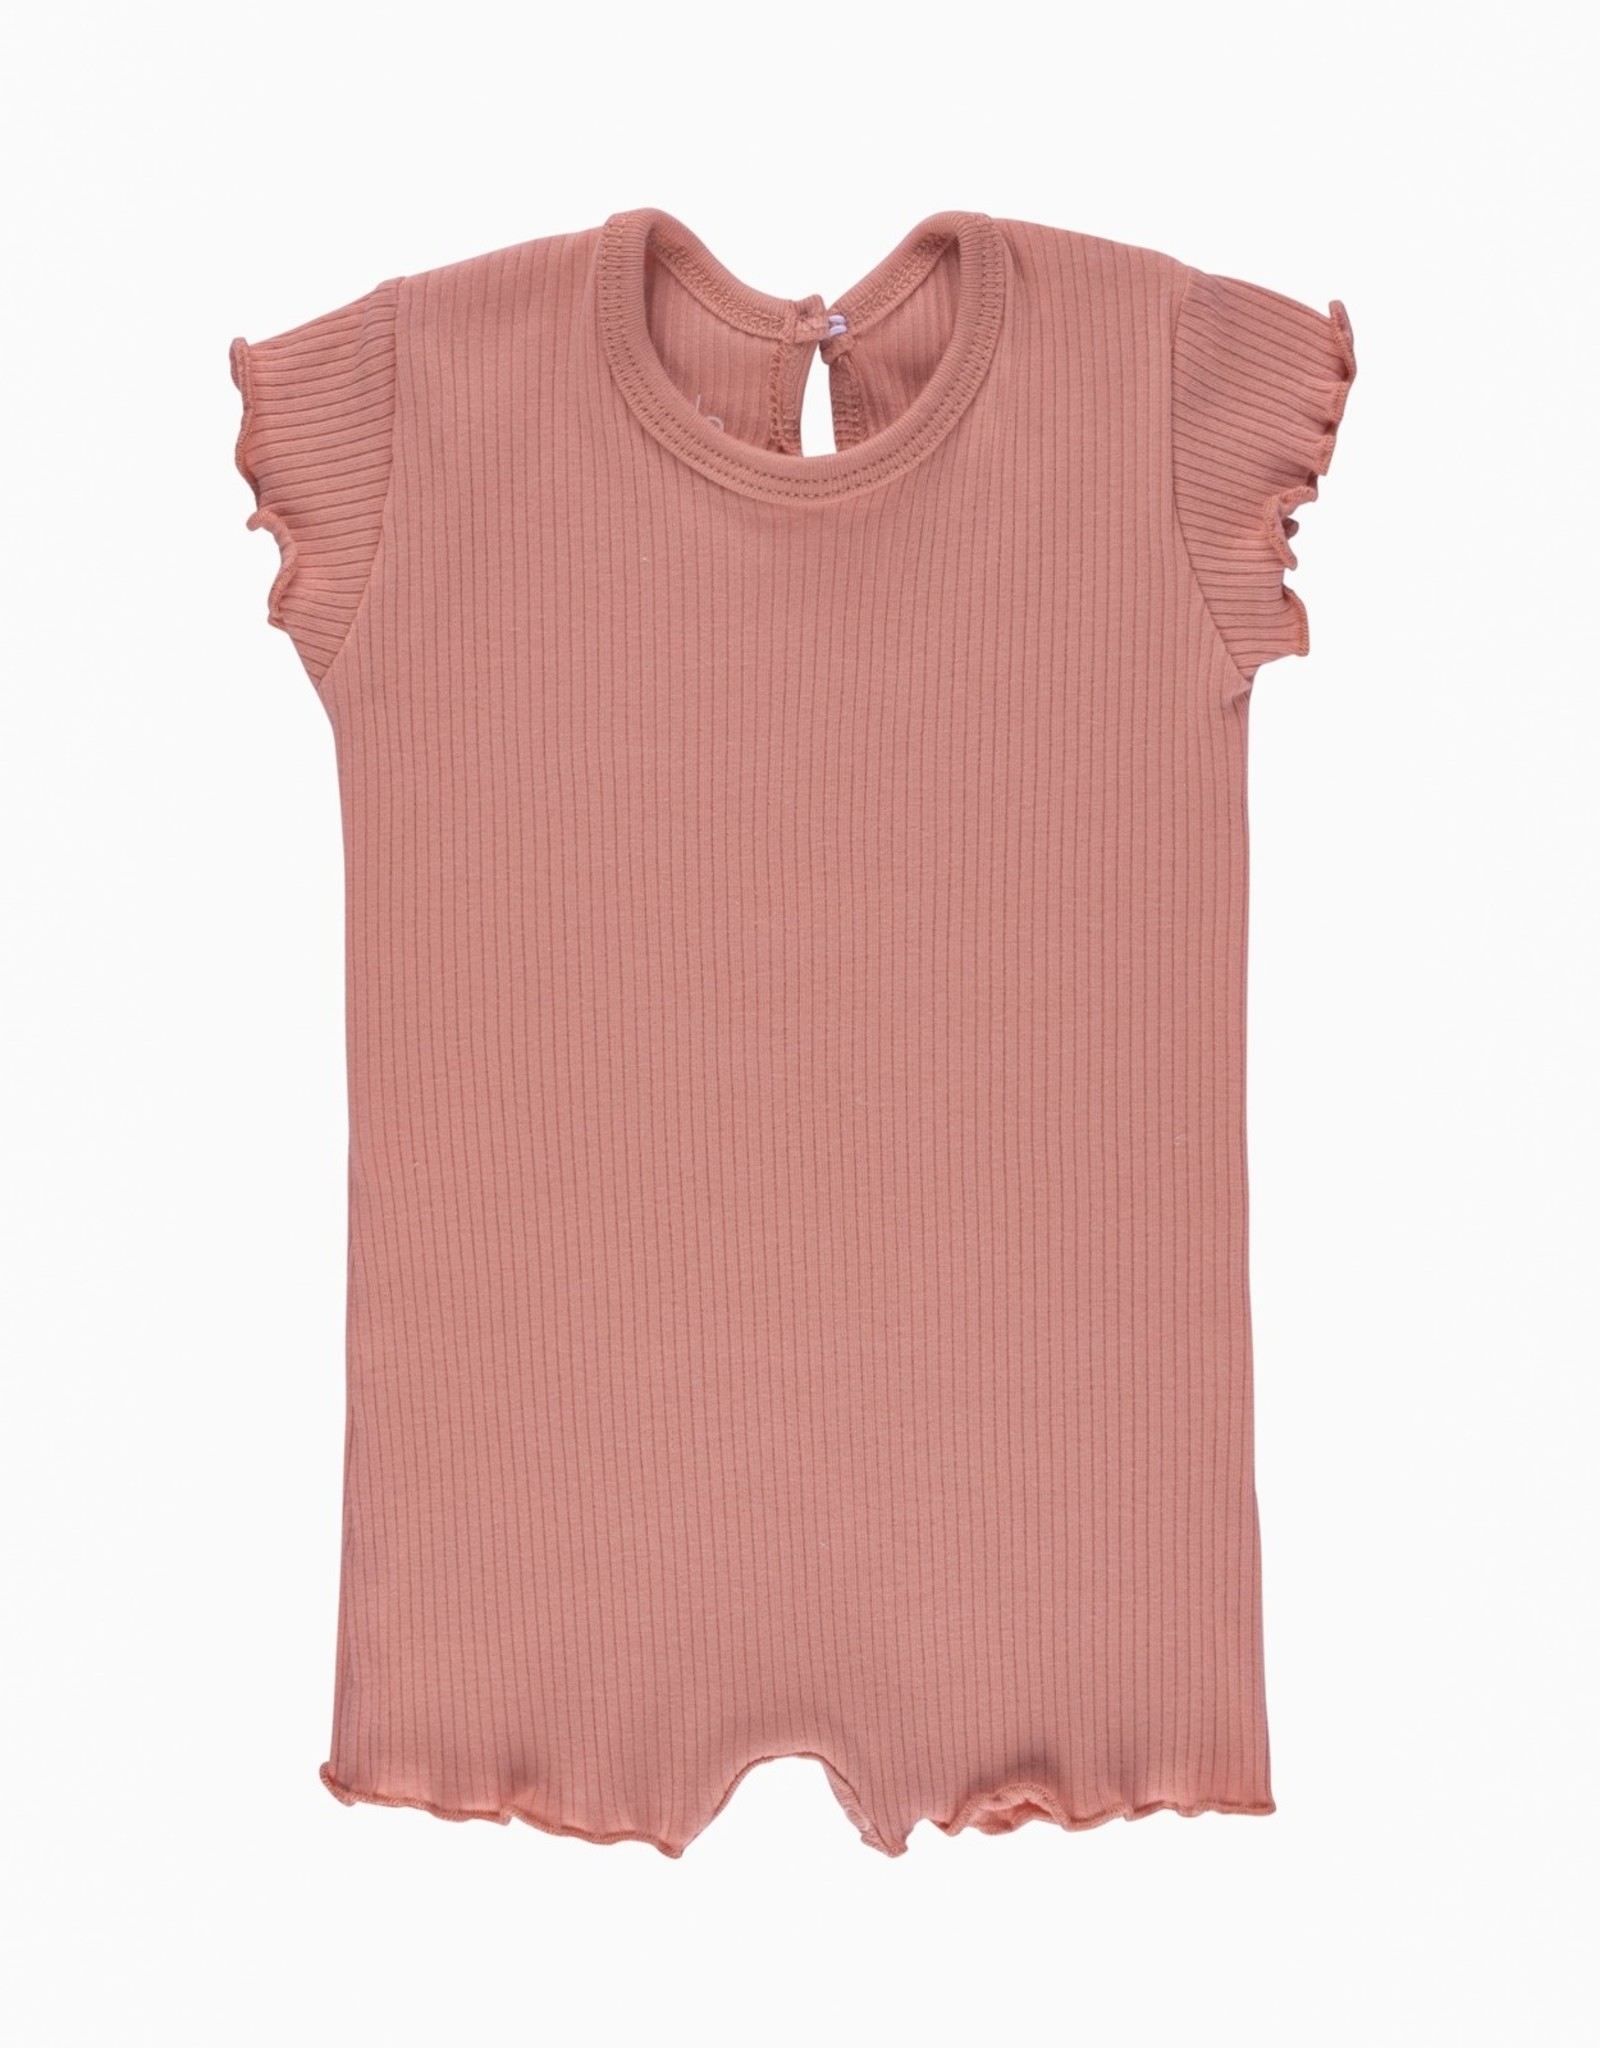 Ely's & Co ely's & co Ribbed Romper